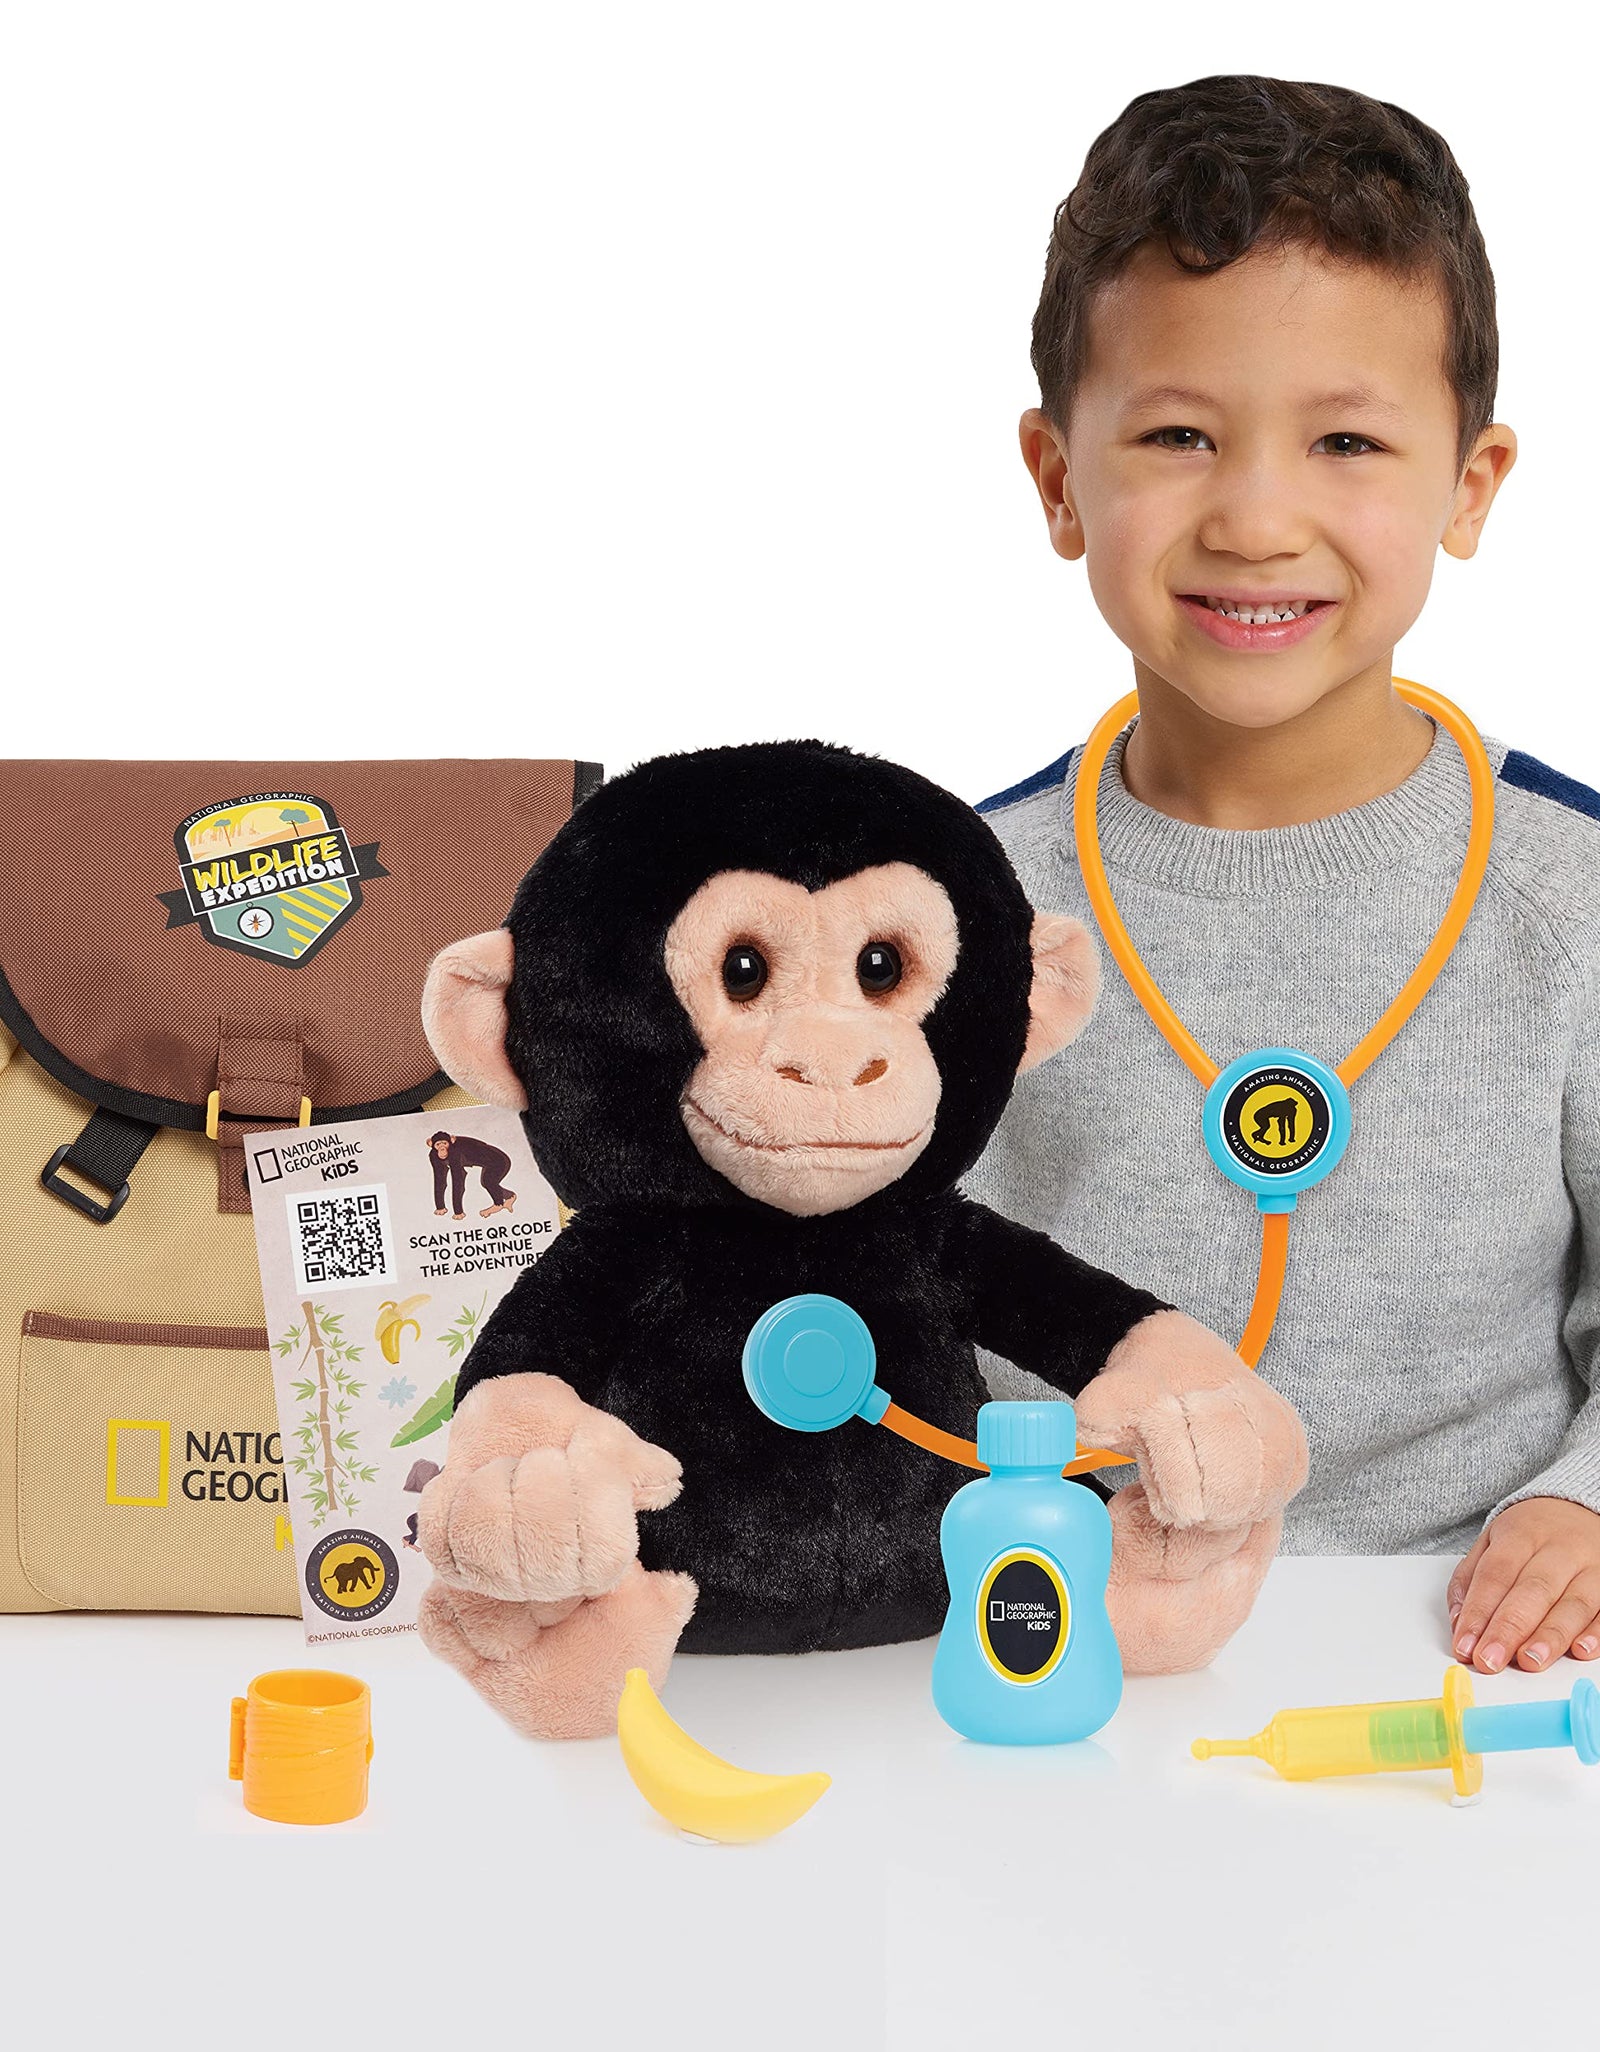 National Geographic Kids Chimpanzee Care & Nurture Vet Set, Interactive Stuffed Animal Toy, Sounds & Backpack, QR Code to Chimp Facts, Recycled Materials, Amazon Exclusive, by Just Play